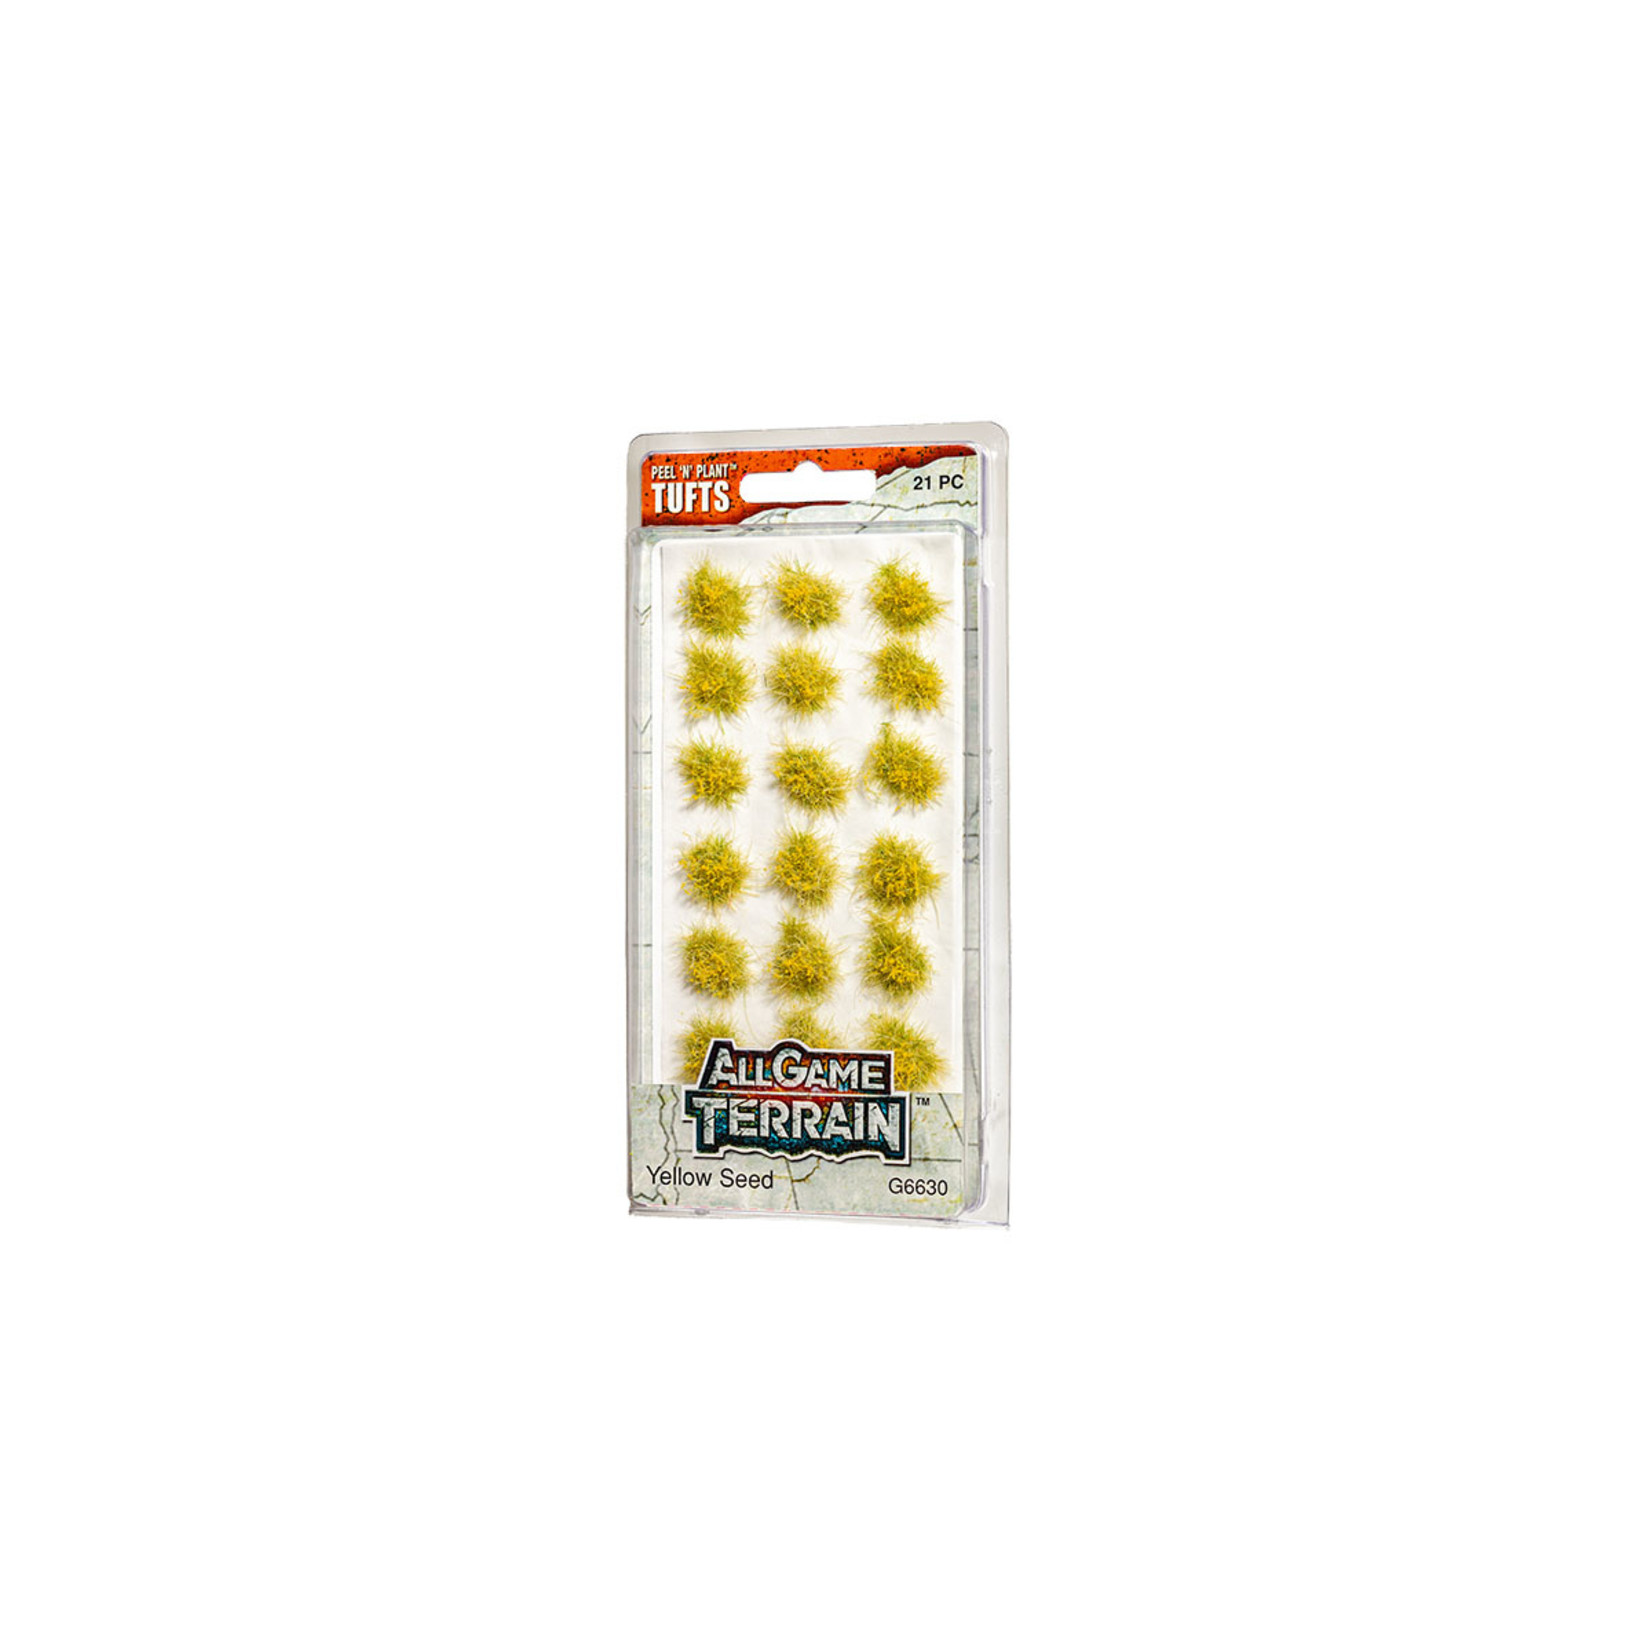 Woodland Scenics All Game Terrain G6630 Peel 'N' Plant Tufts Yellow Seed (21)